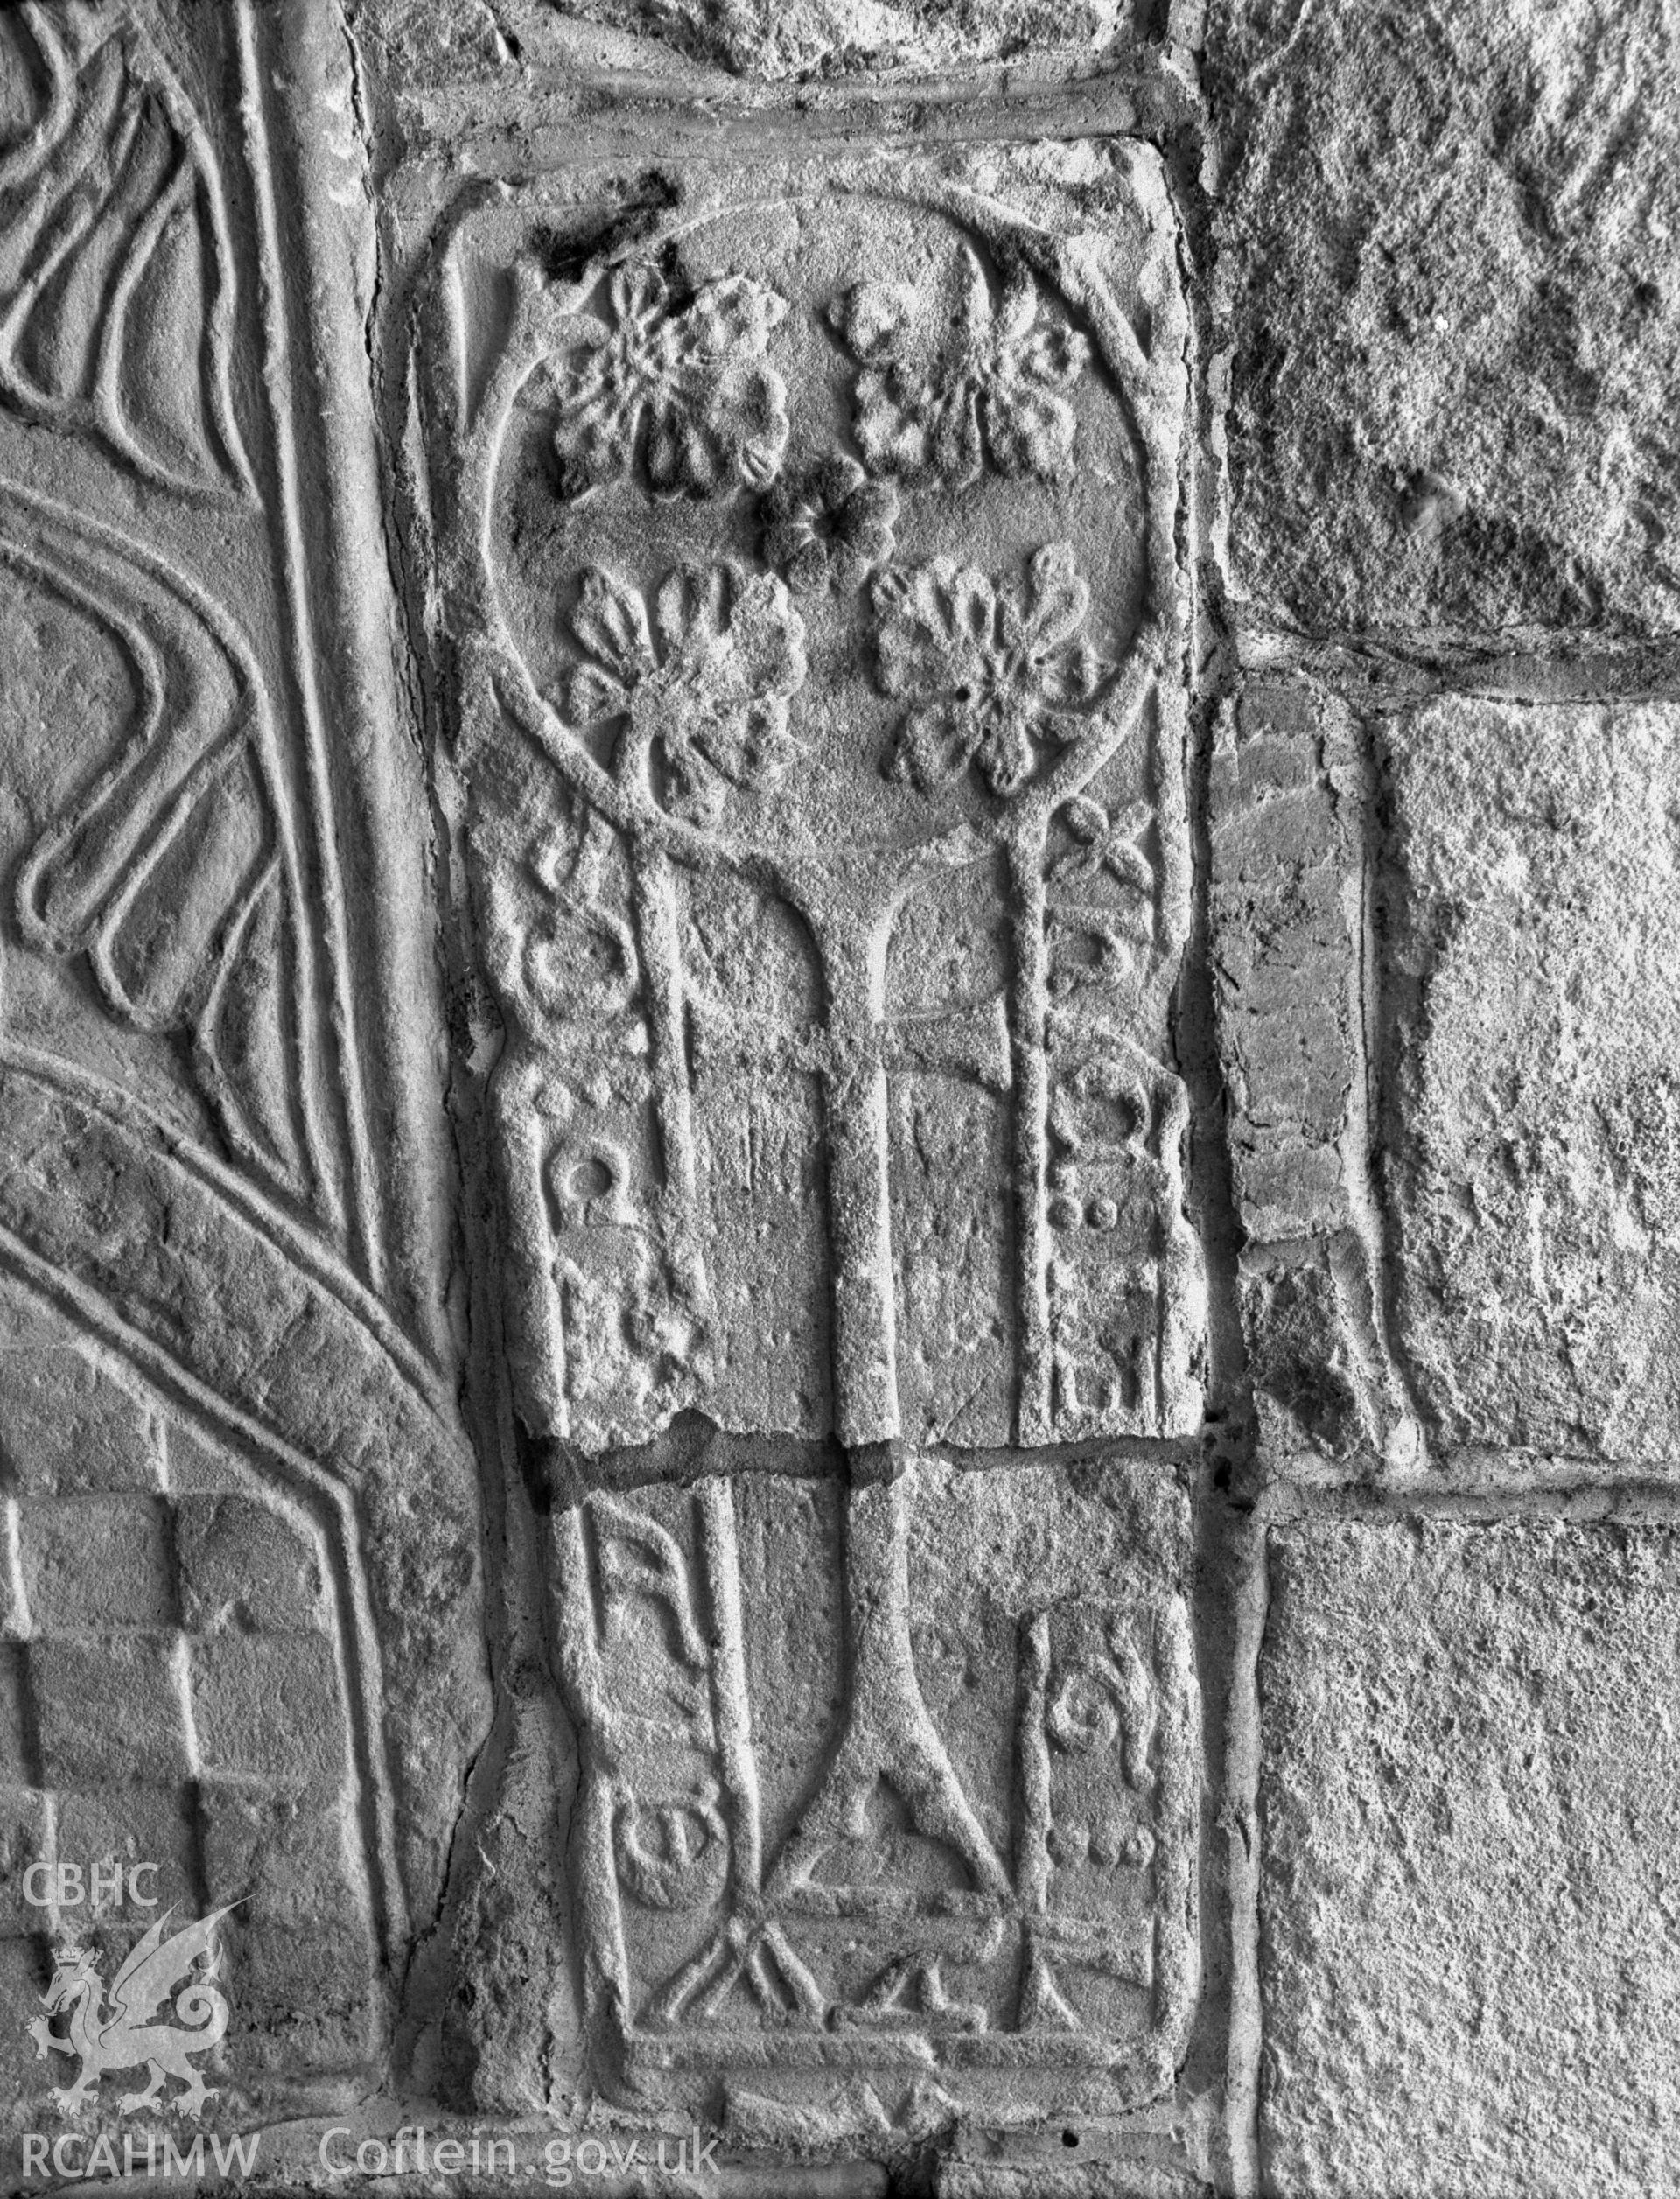 View of decorated slabs in the walls of St Benedicts Church, Gyffin, taken 30.09.48.